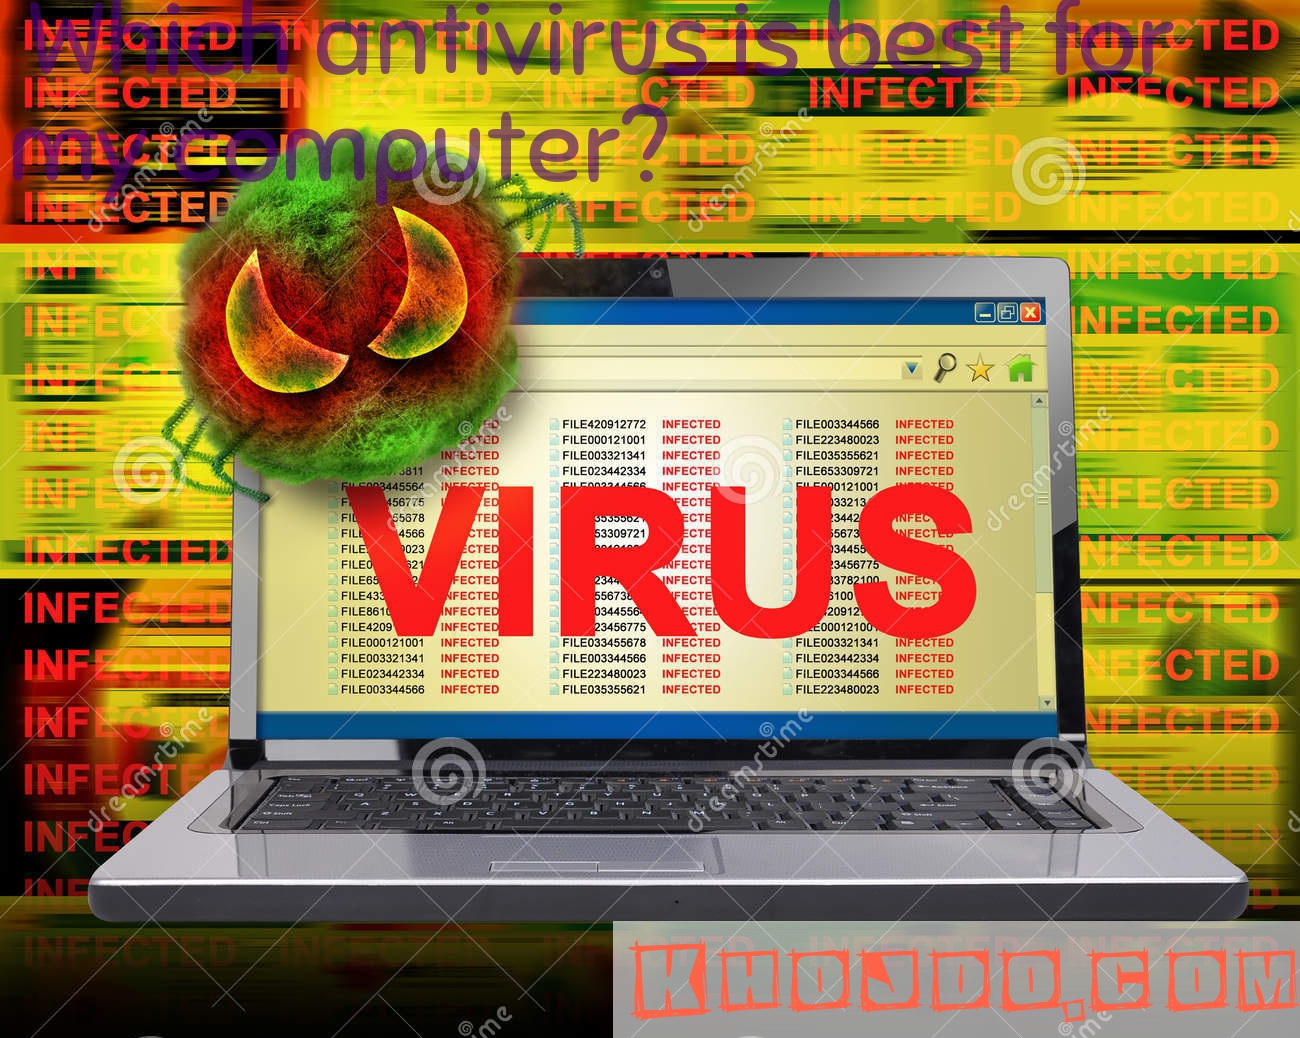 Which antivirus is best for my computer